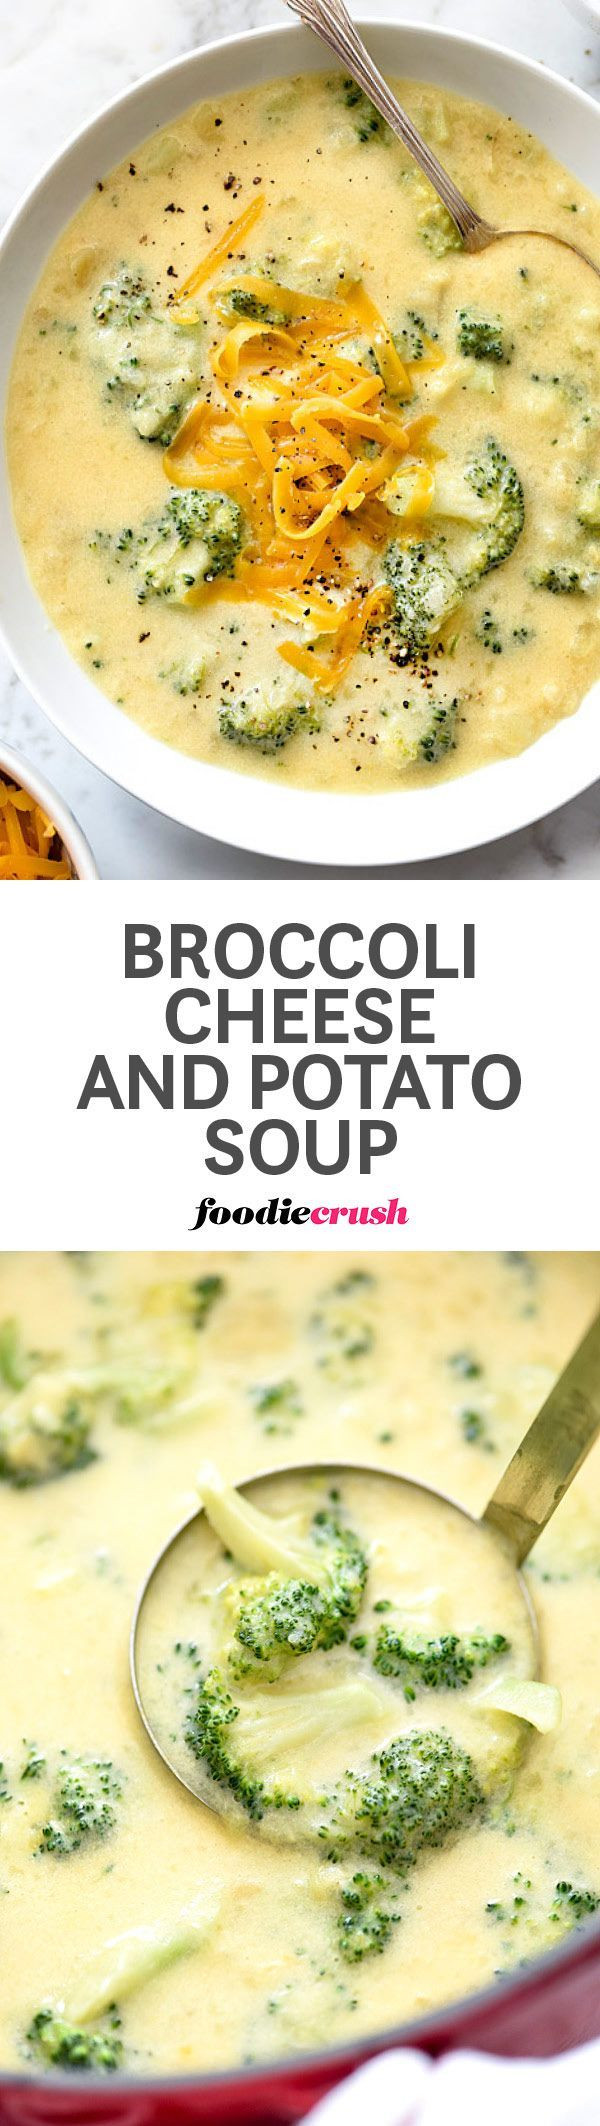 Broccoli Potato Soup Healthy
 best Healthy Recipes images on Pinterest